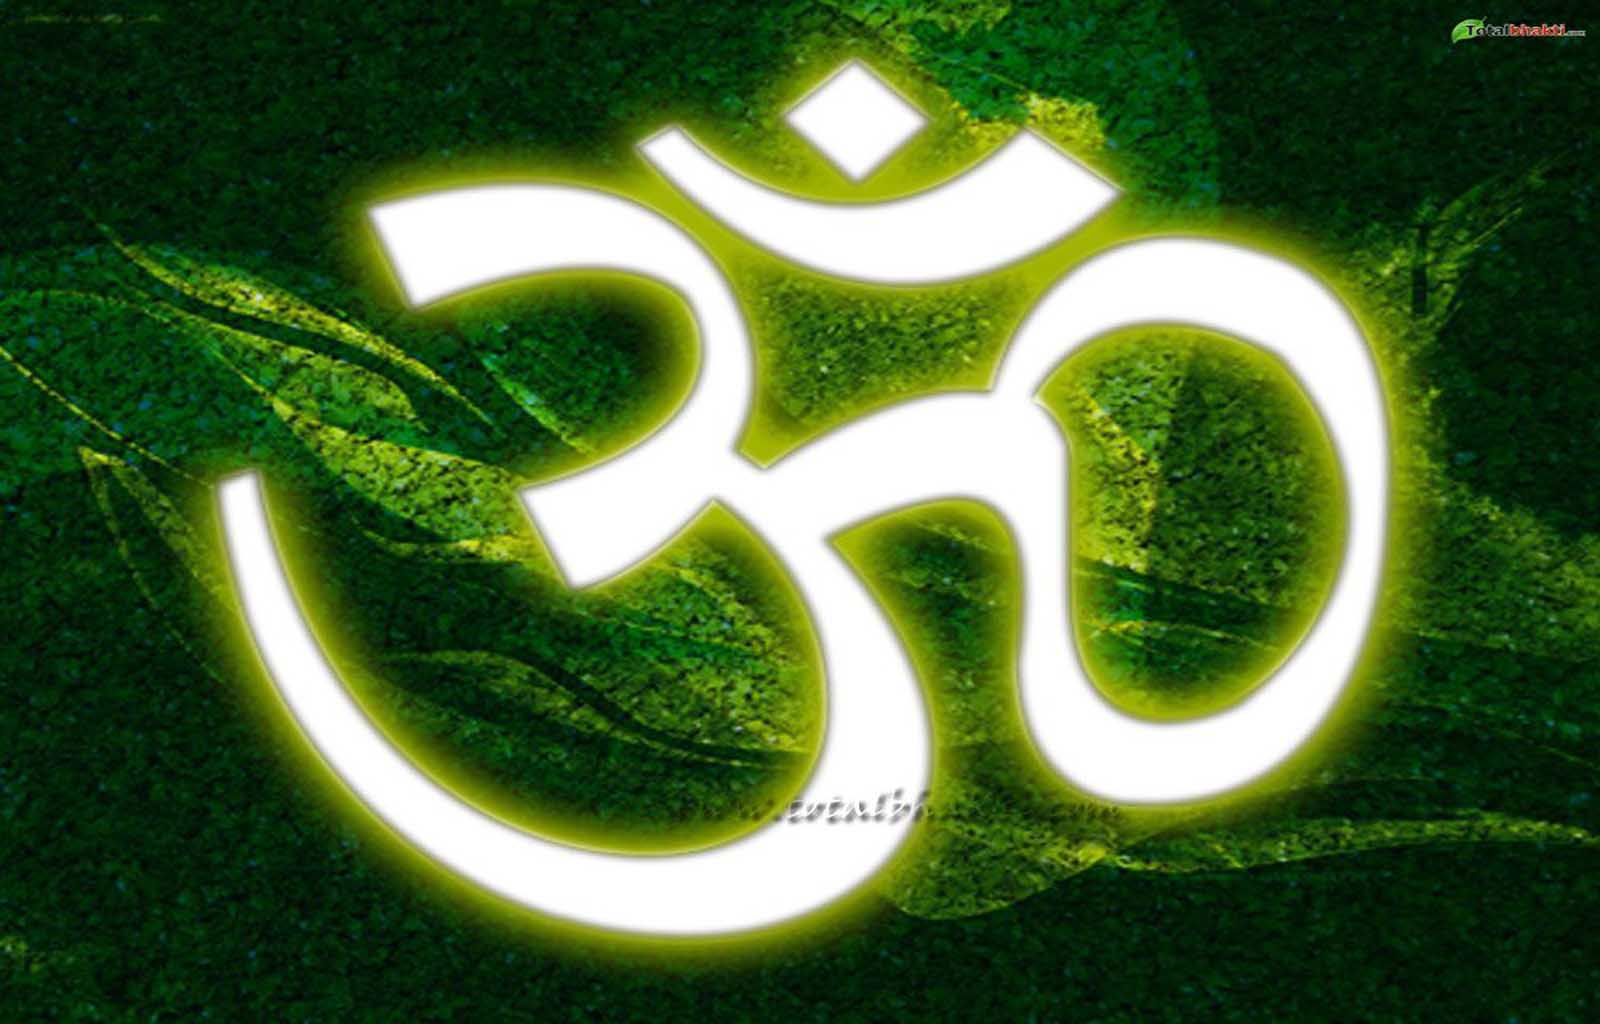 om wallpaper, Hindu wallpaper, Om Image,white and green color ...